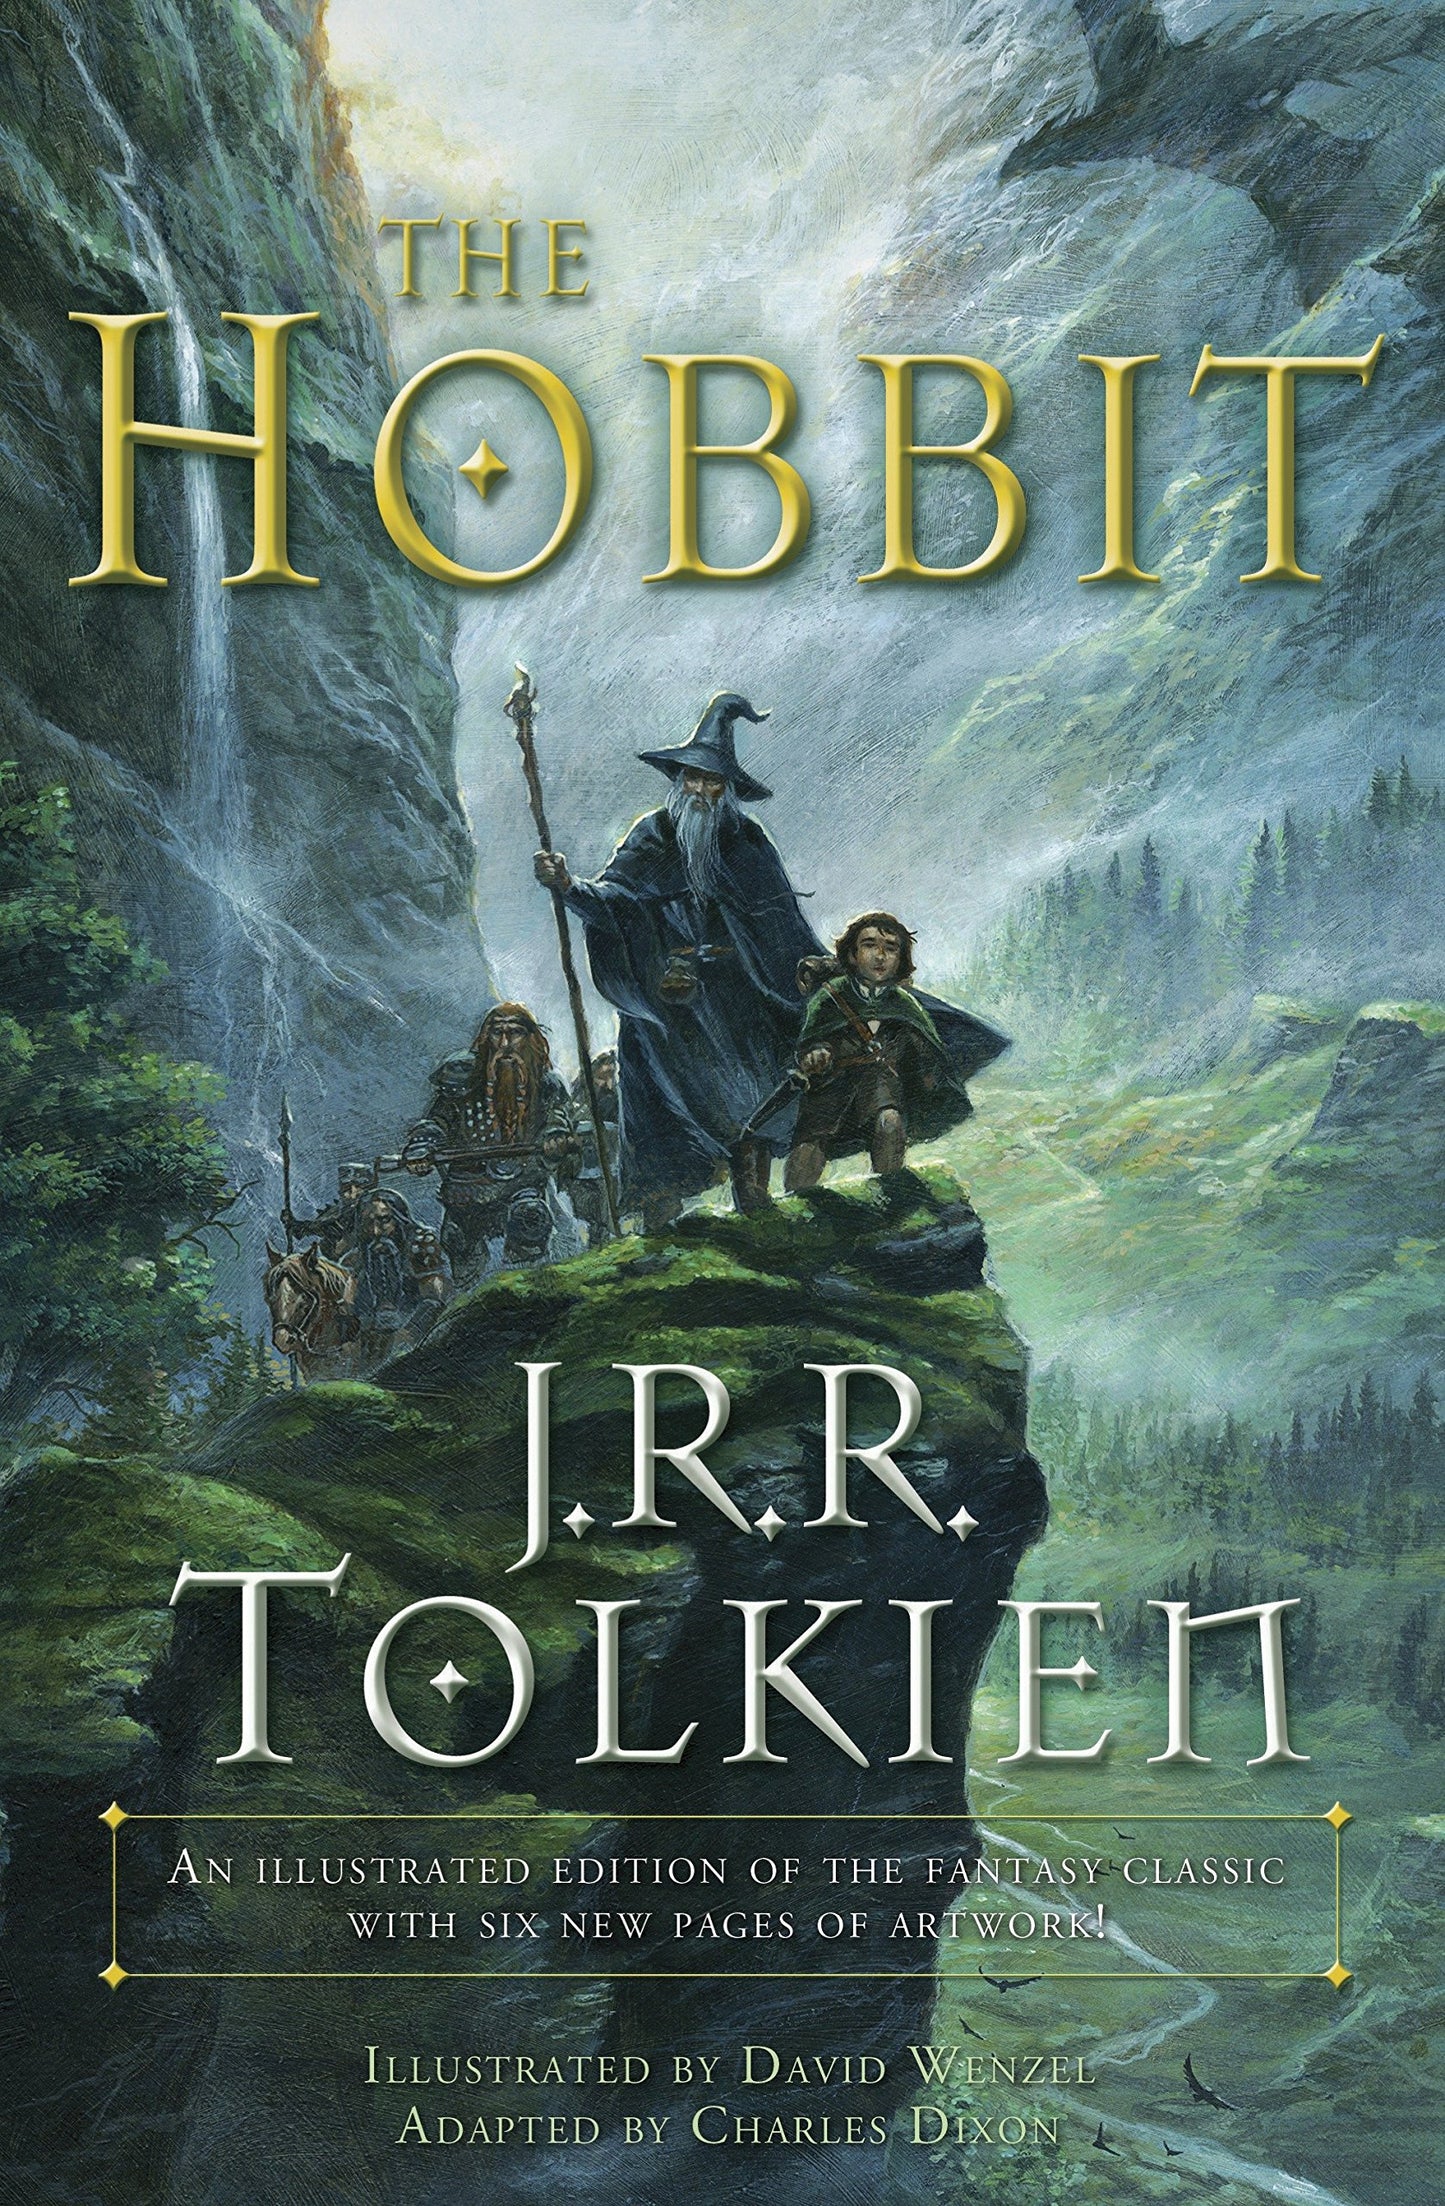 THE HOBBIT: AN ILLUSTRATED EDITION - TOLKIEN, J.R.R. - PAPERBACK